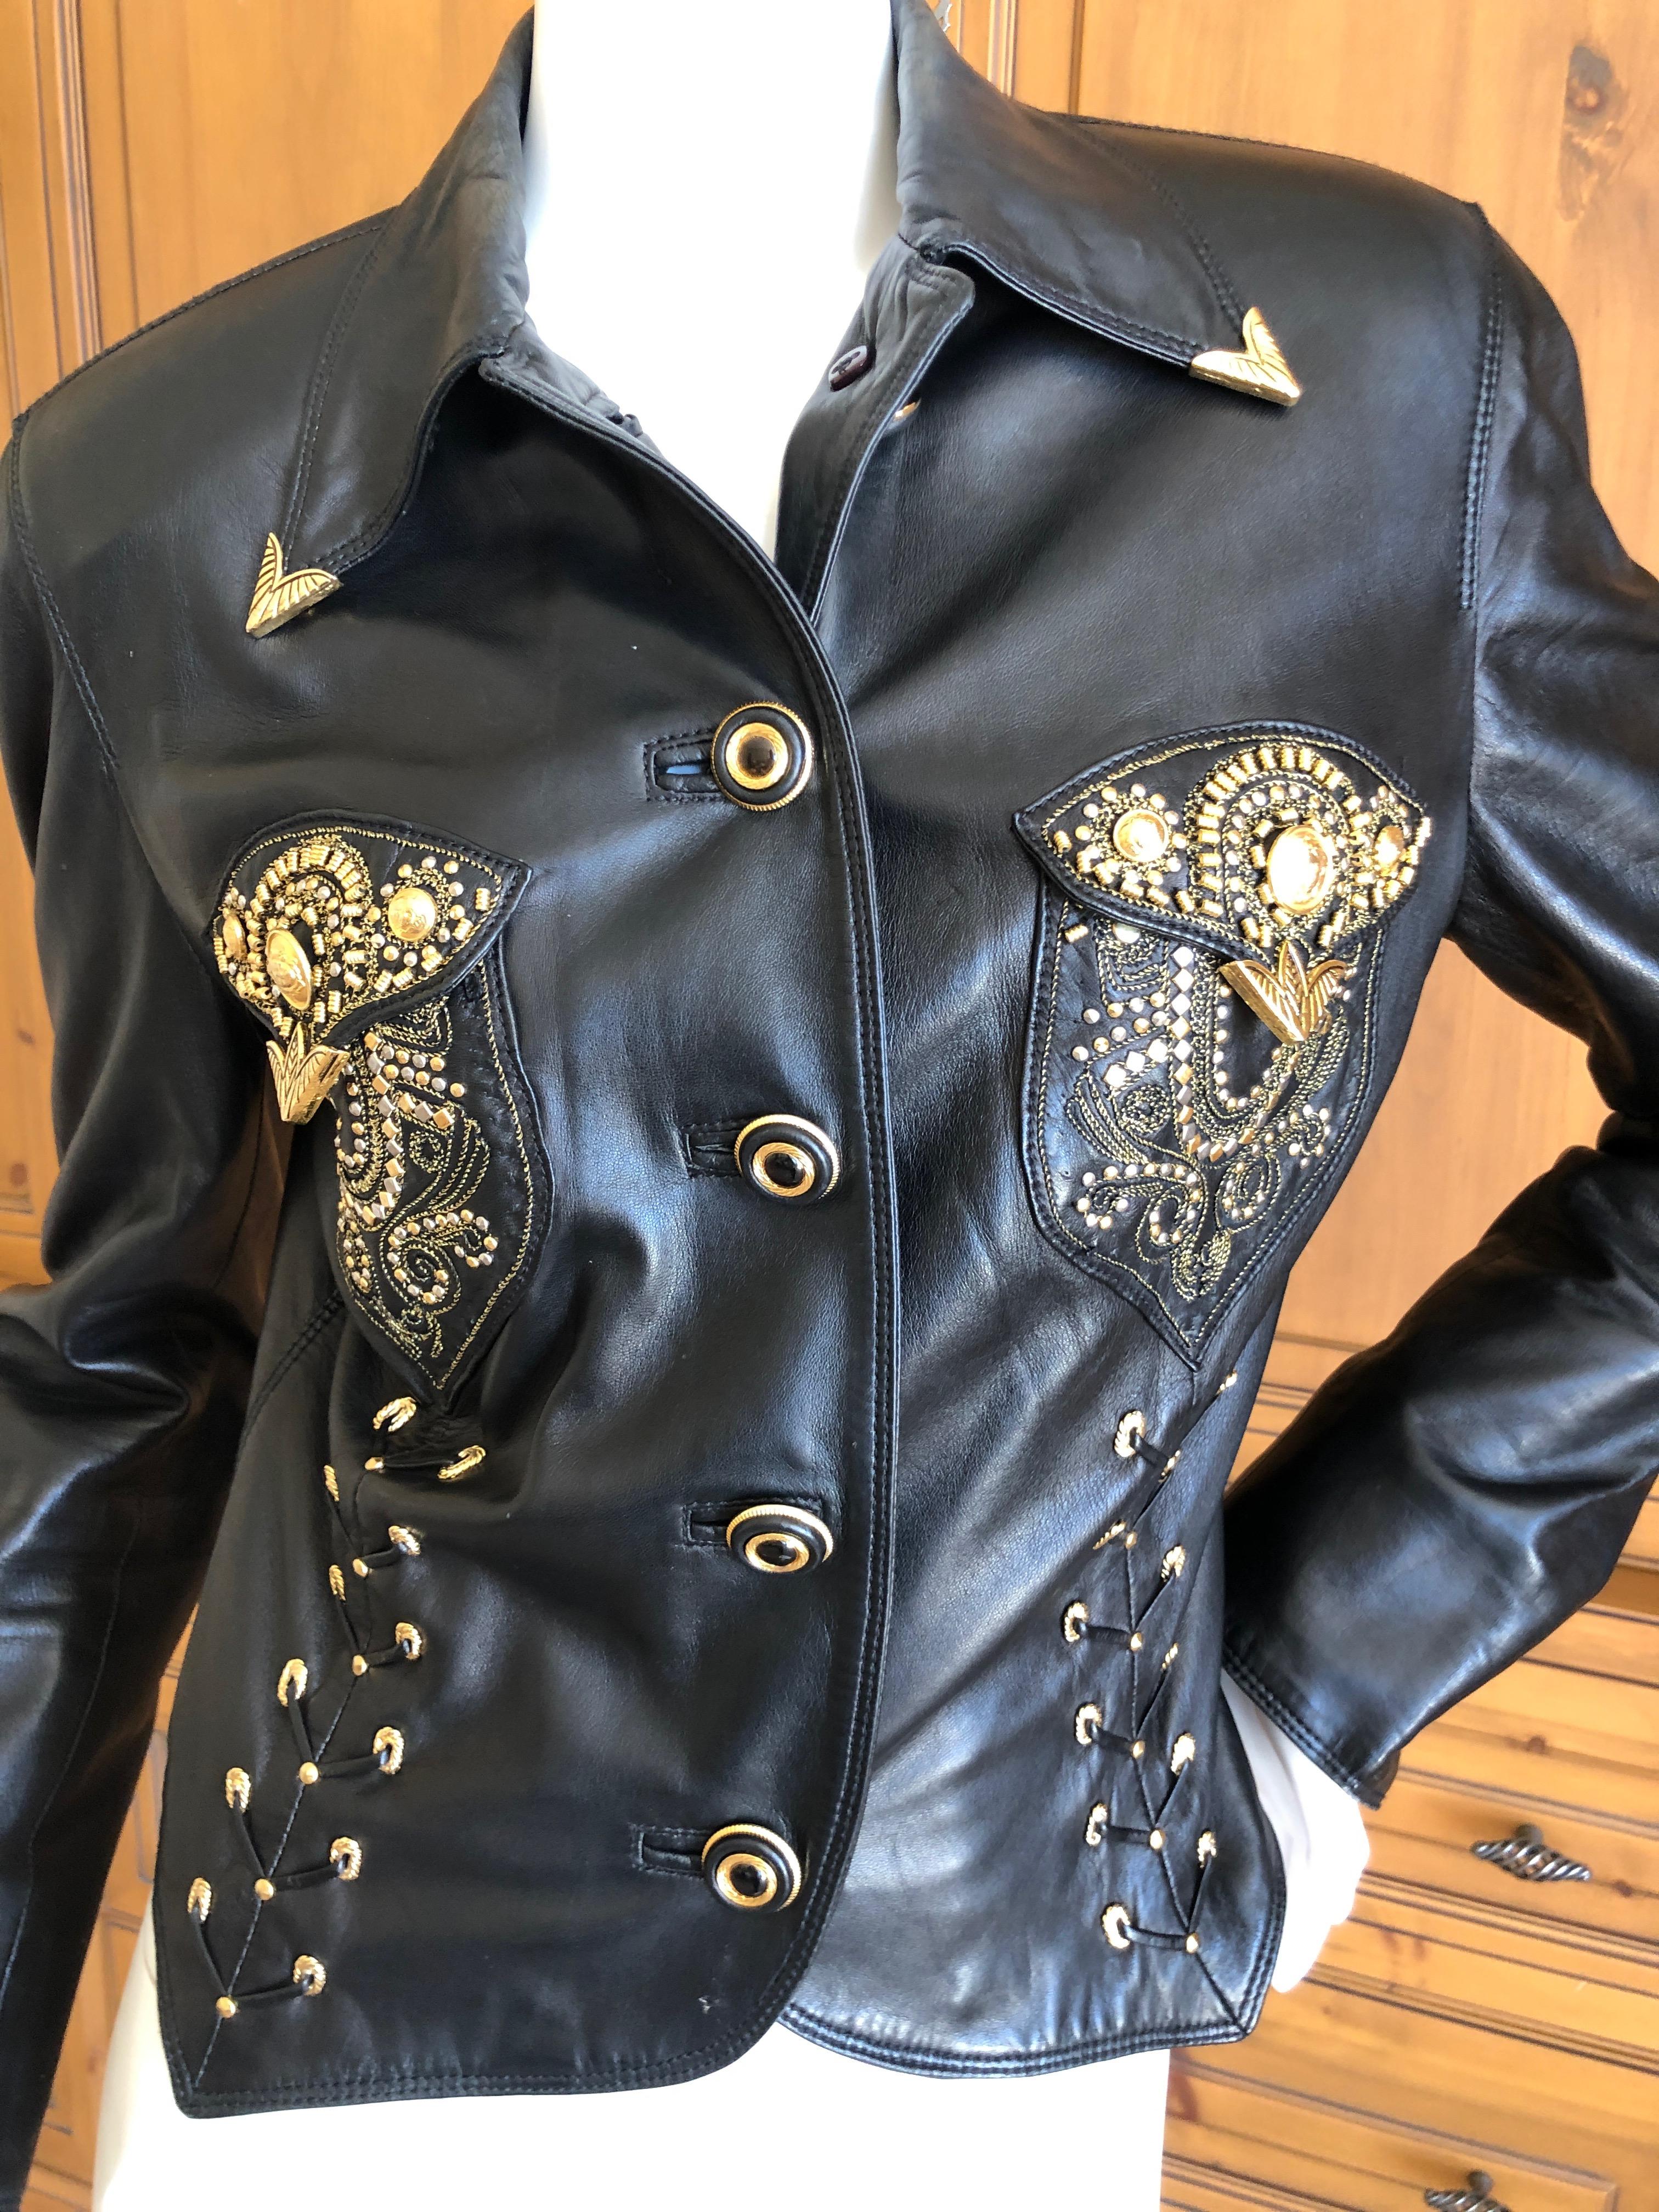 Gianni Versace 1990 Lambskin Lace Up Leather Moto Jacket with Gold Embellishment.
This is so amazing, please use the zoom feature to see the details.
Corset lacing on the sides are laced through gold plated grommets.
 In Excellent Condition. 
Bust